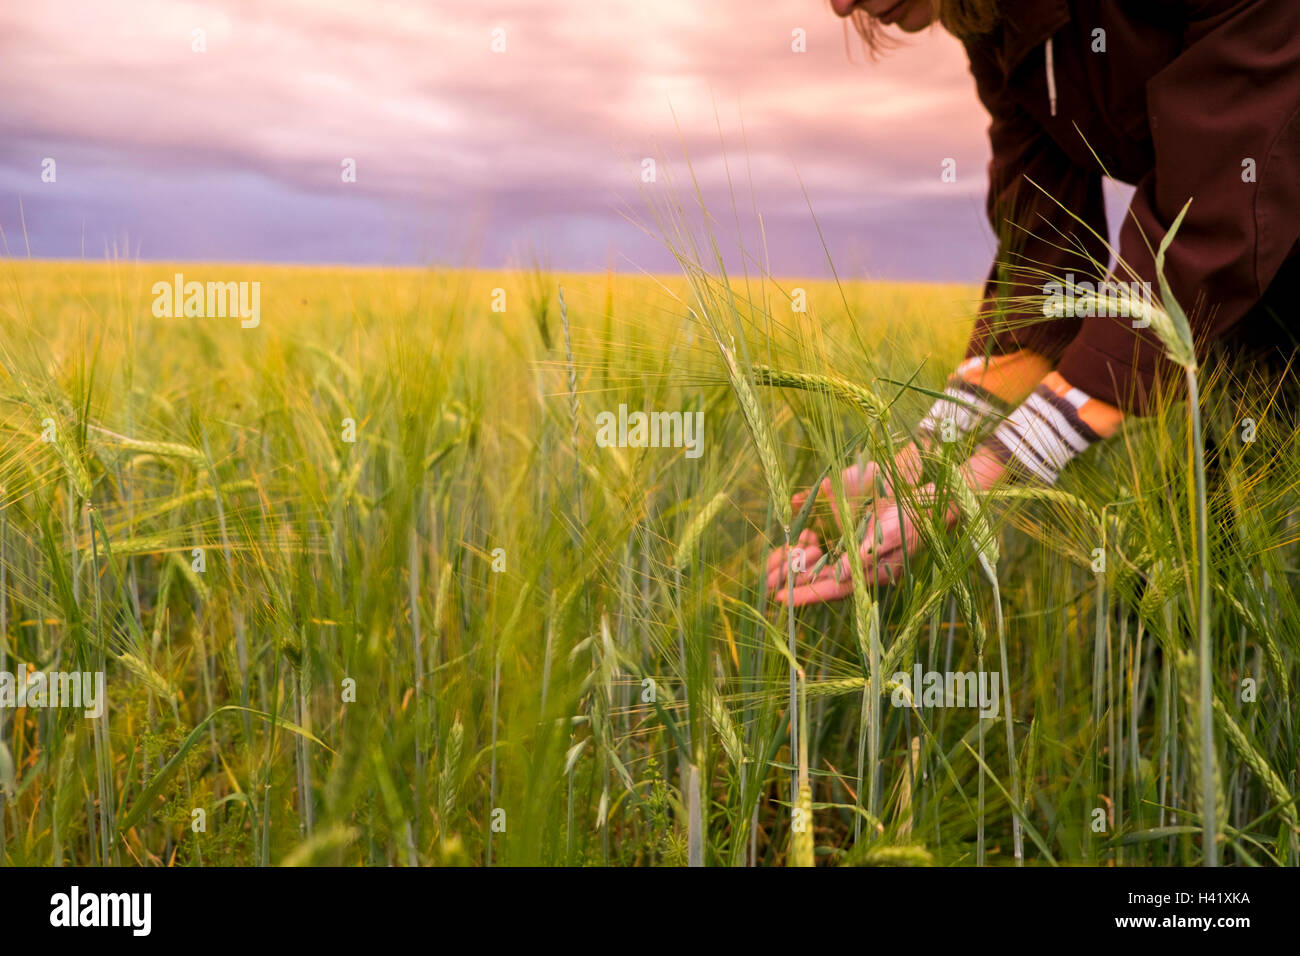 Caucasian woman holding grass in field Banque D'Images